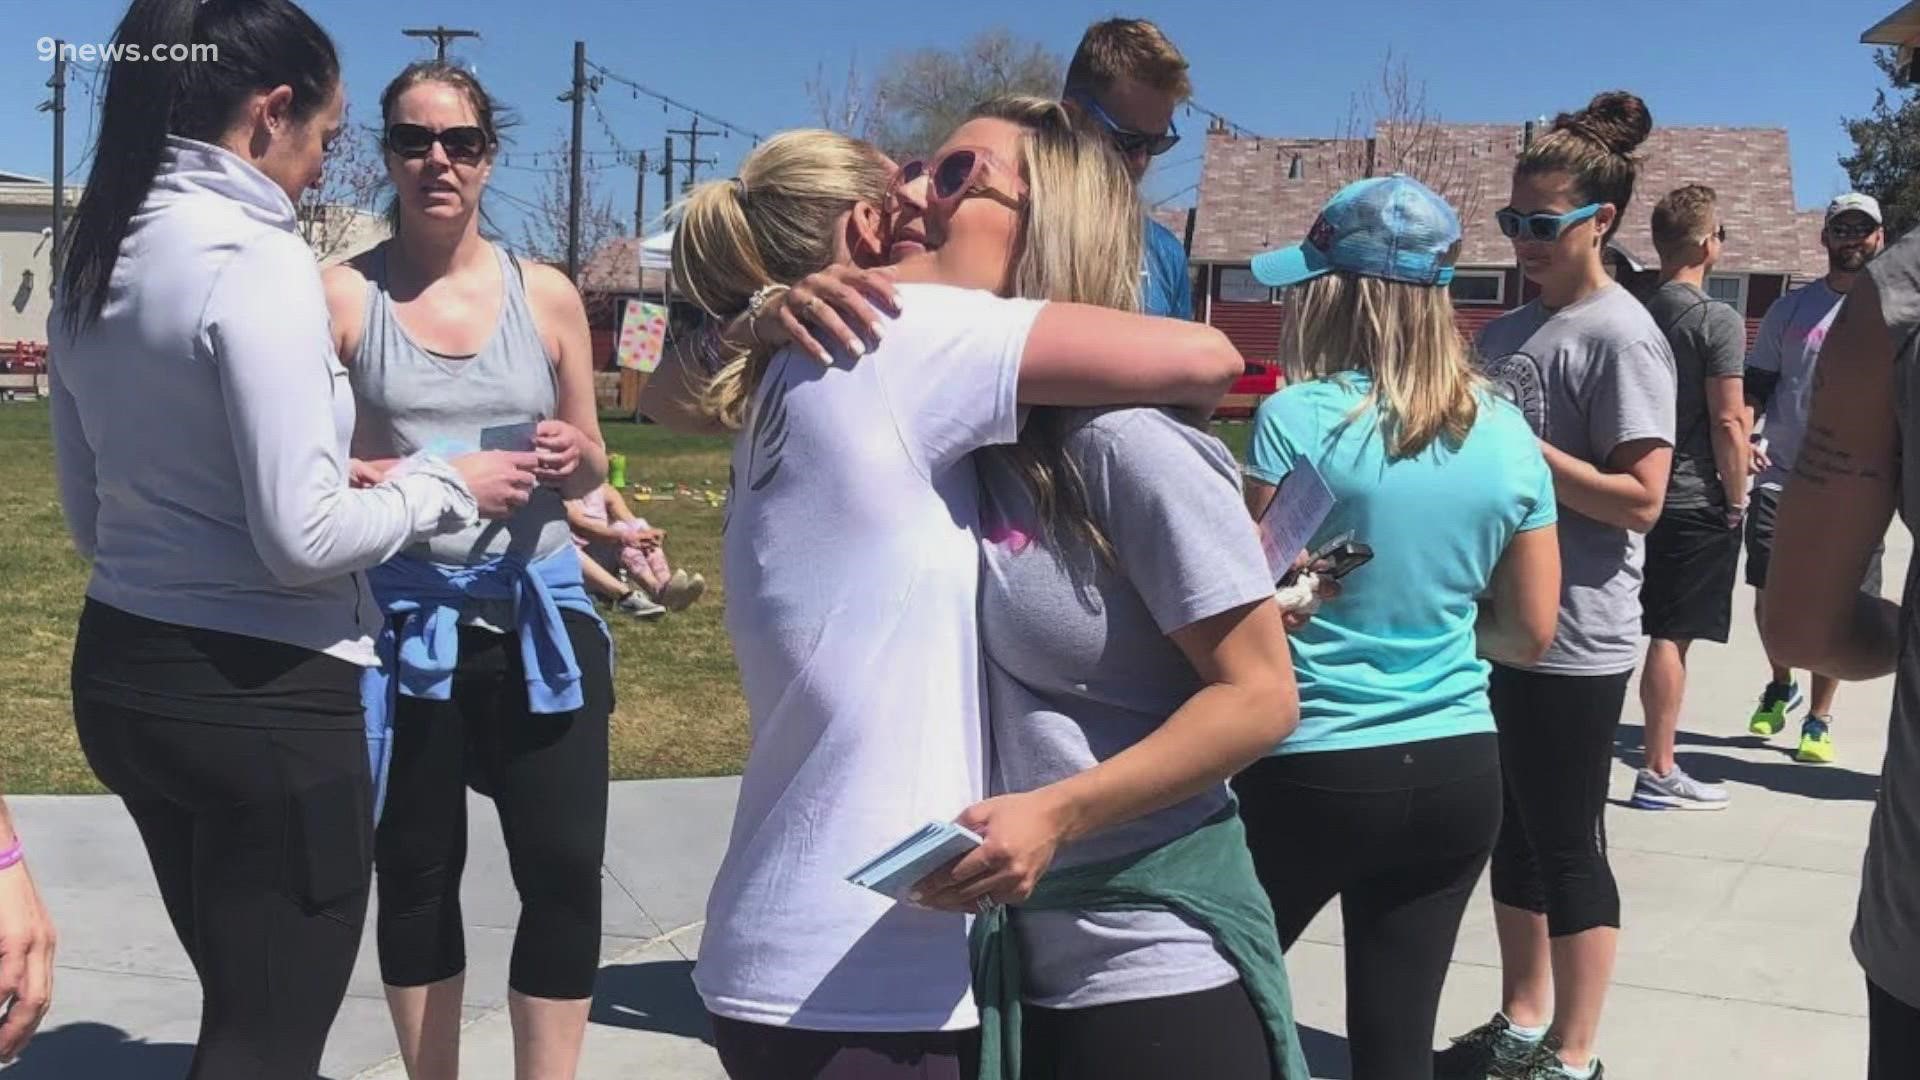 A Colorado mother who survived the heartbreak of losing a child transformed her grief into something powerful to help others.